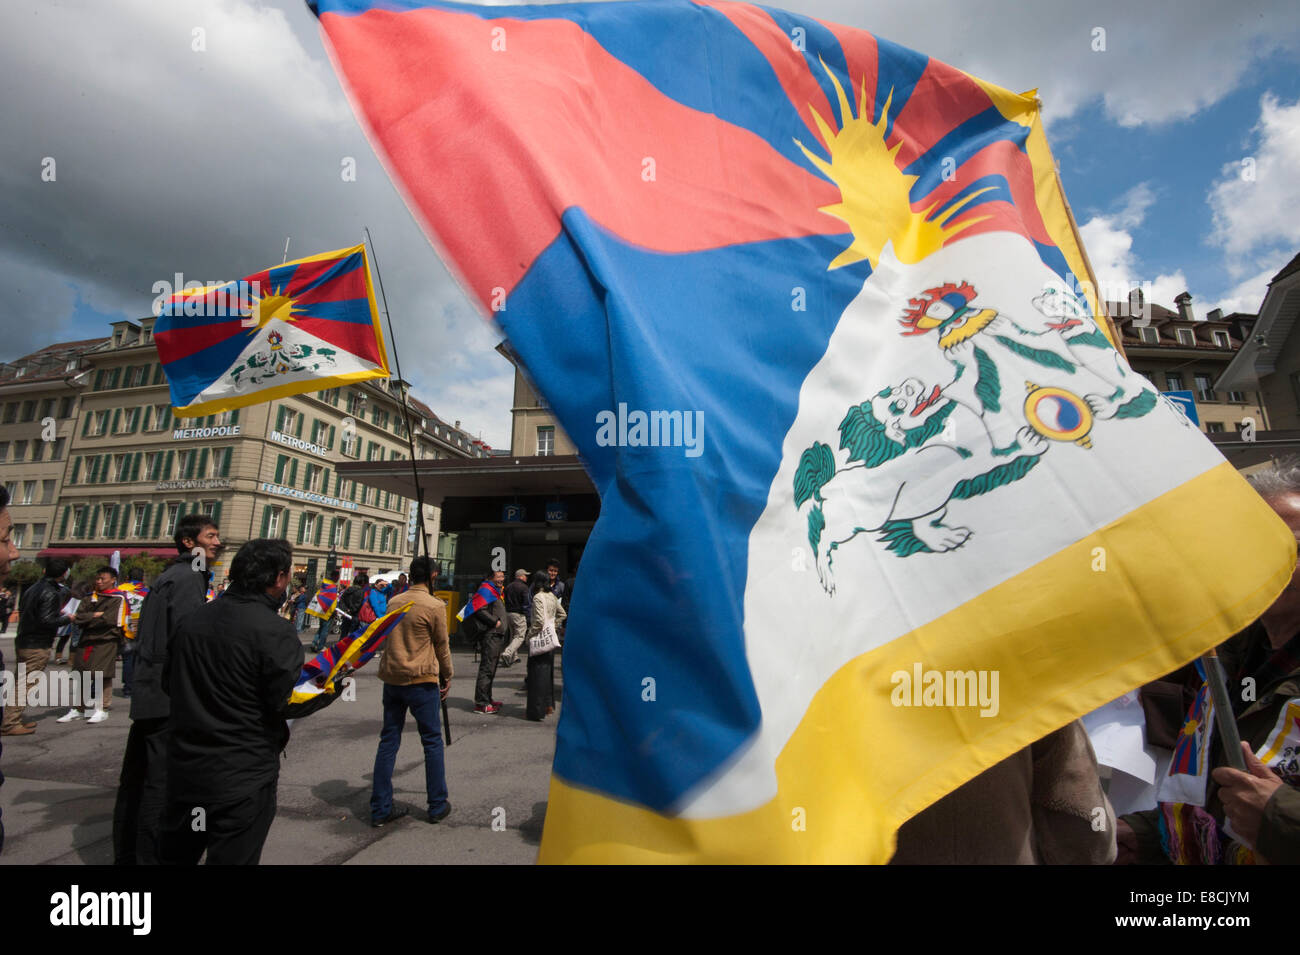 Tibetans living in exile in Switzerland protest during the visit of China's Premier Li Keqiang in Switzerland's capital Bern. Stock Photo